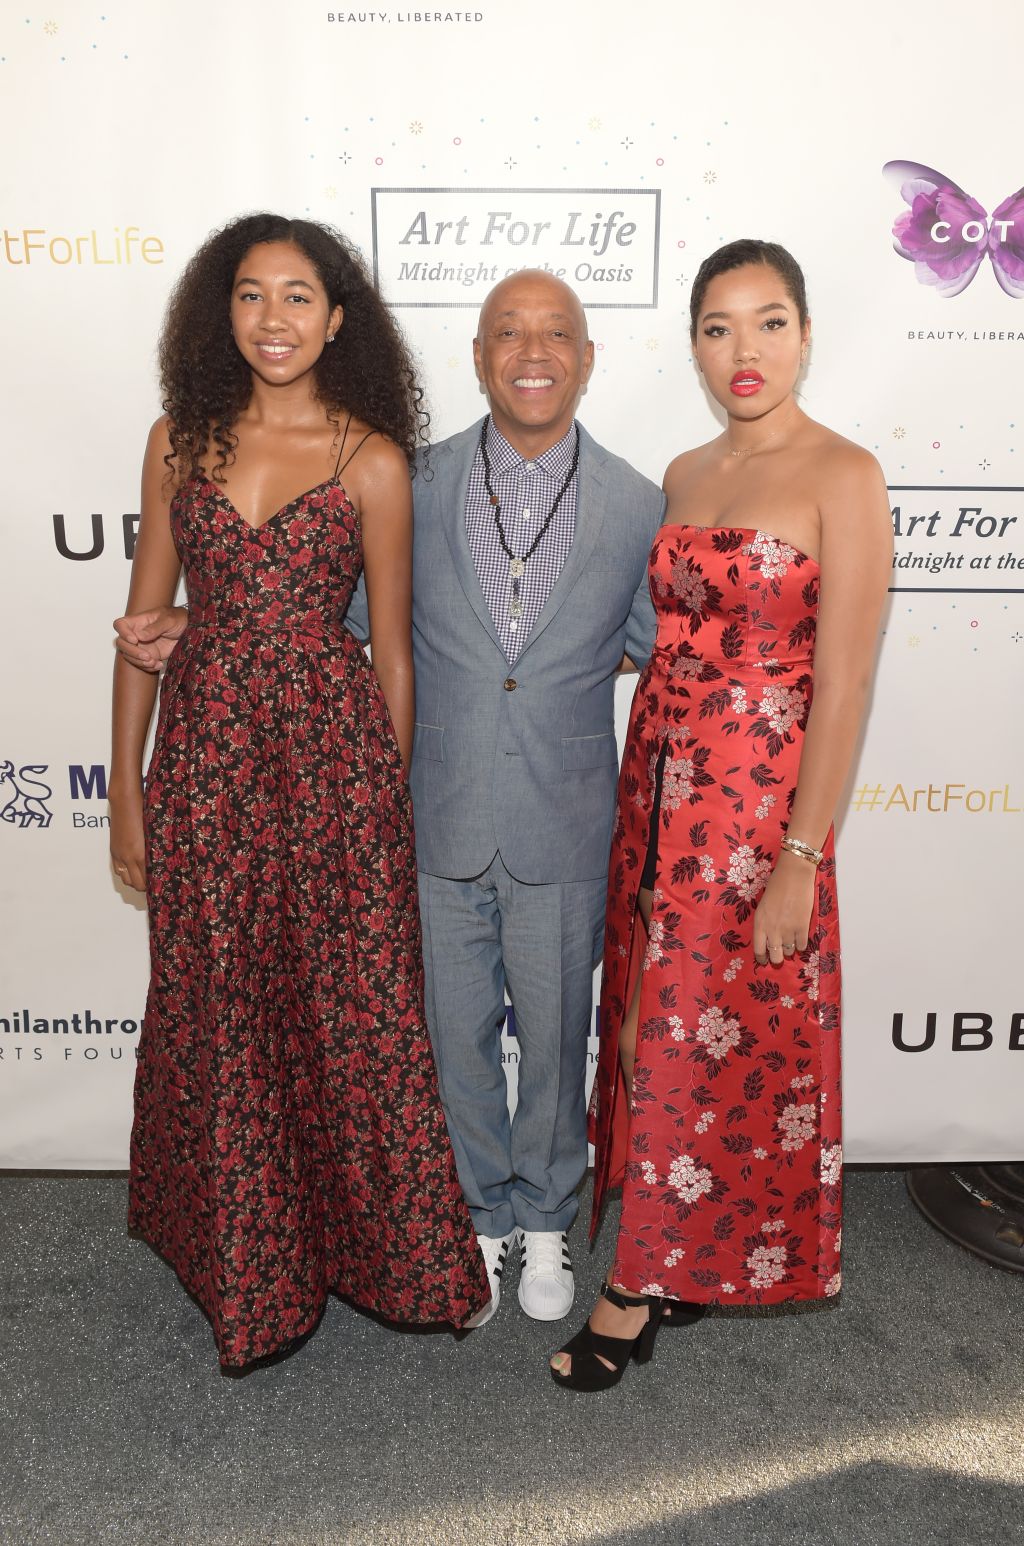 Russell Simmons' Rush Philanthropic Arts Foundation Hosts 'Midnight At The Oasis' Annual Art For Life Benefit - Arrivals